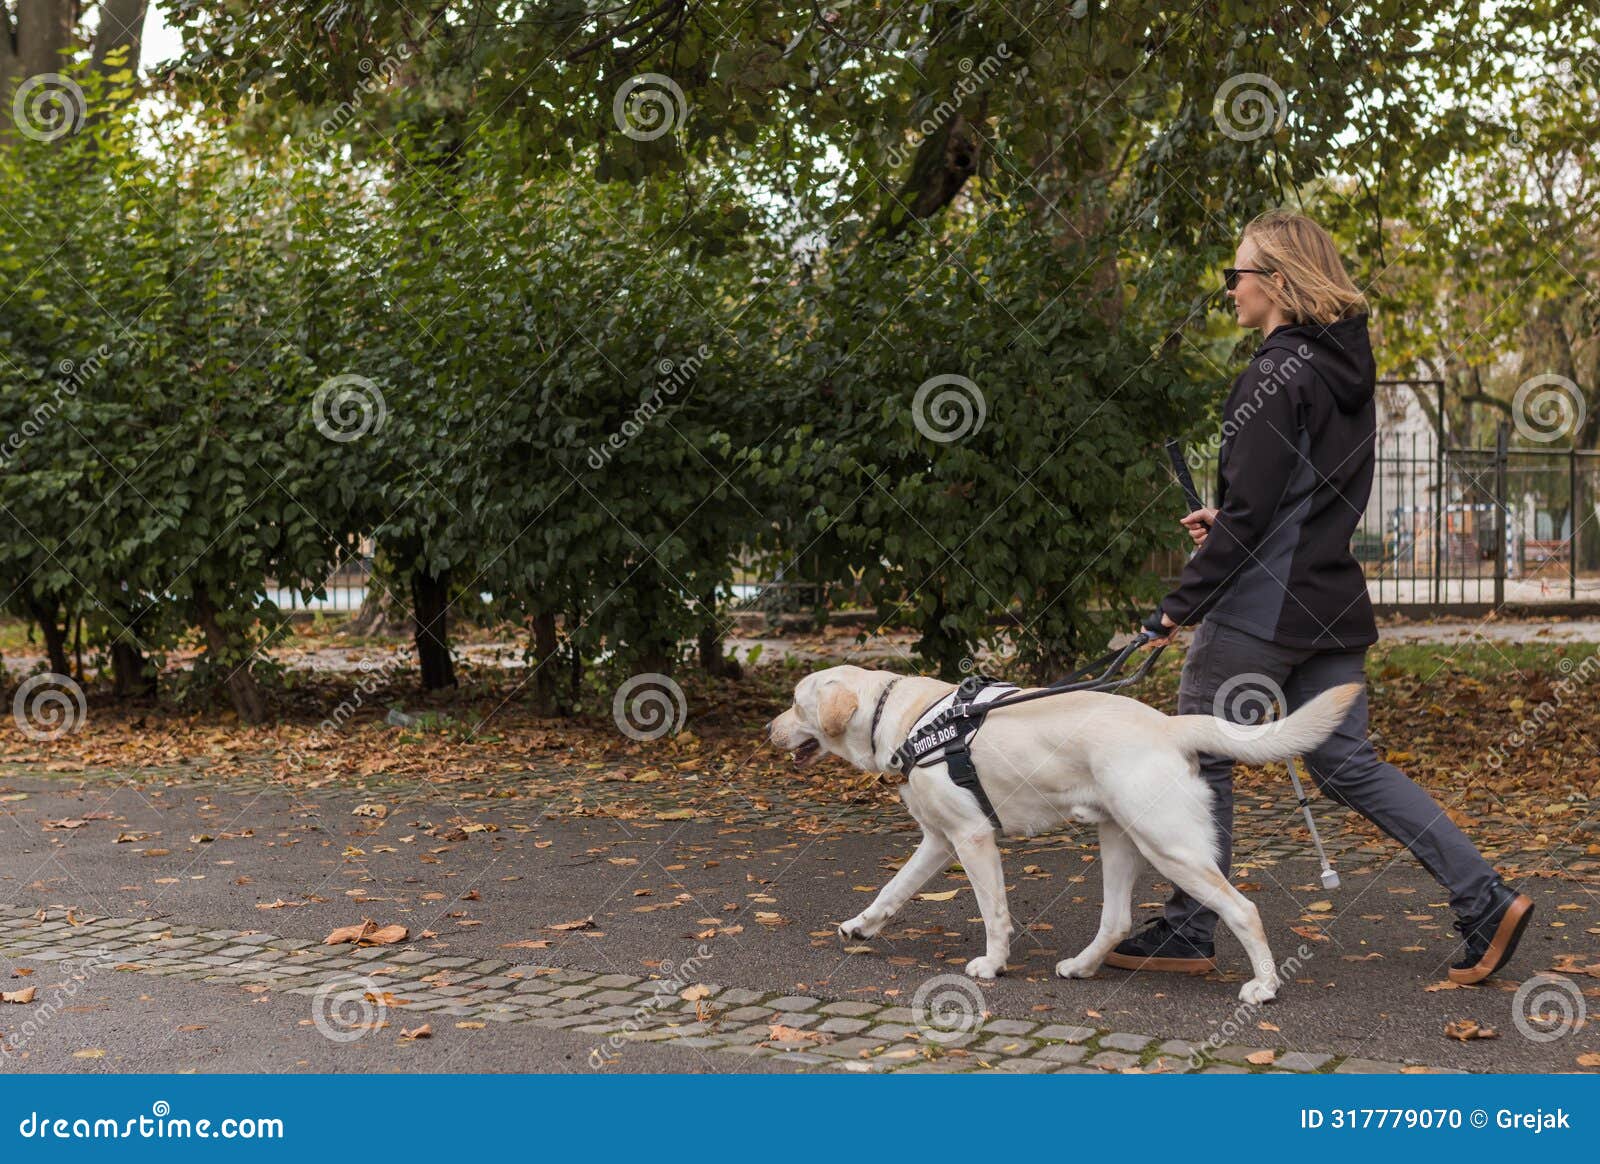 woman with visual impairment walking with a guide dog through park